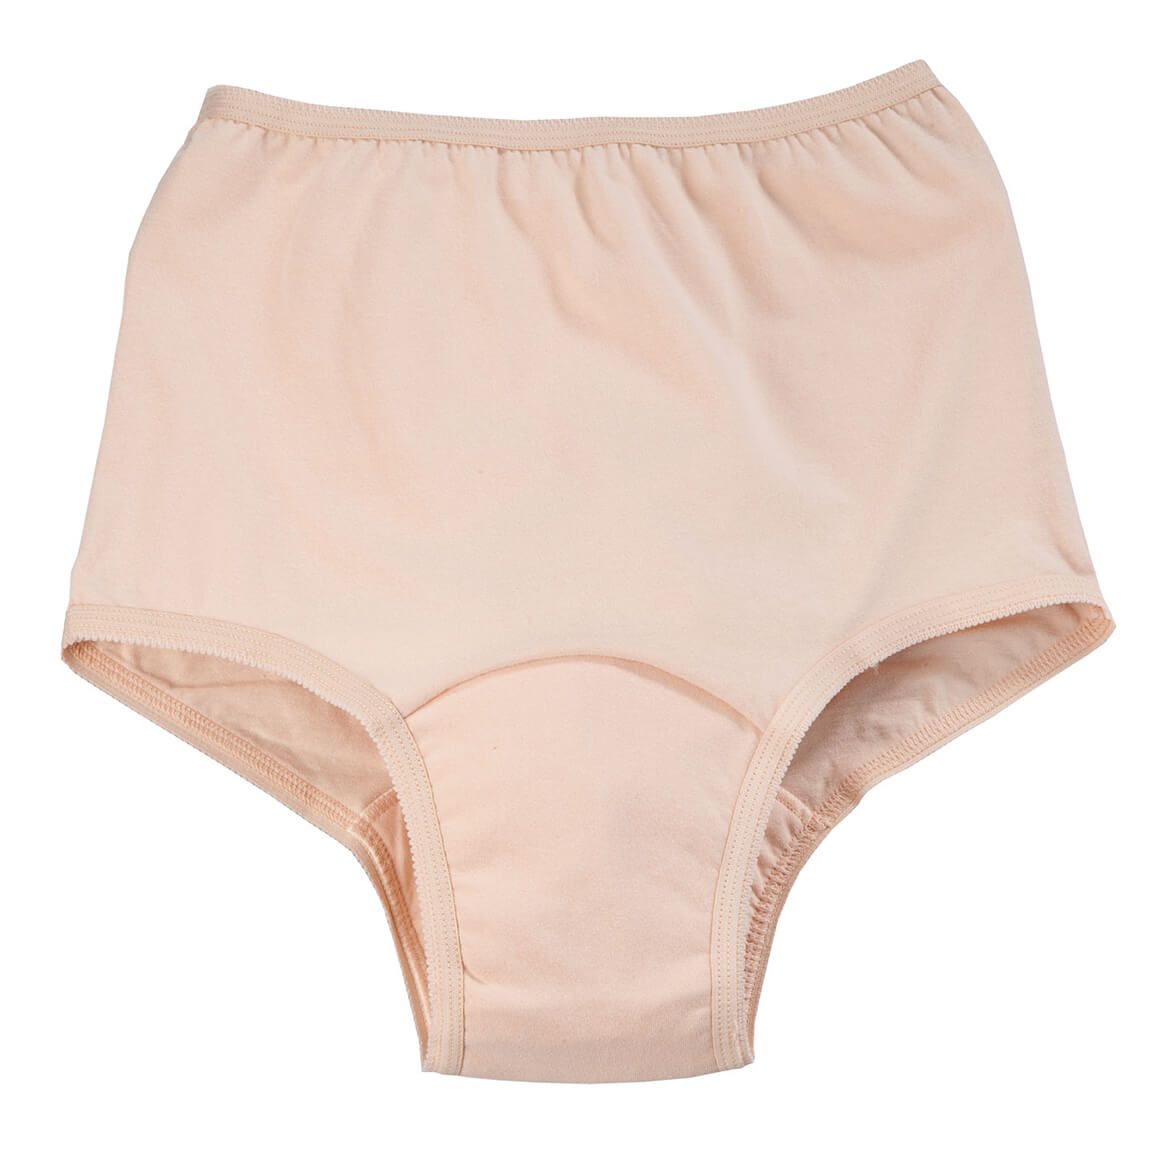 Incontinence Panties For Women, Beige - 10 oz. + '-' + 348103